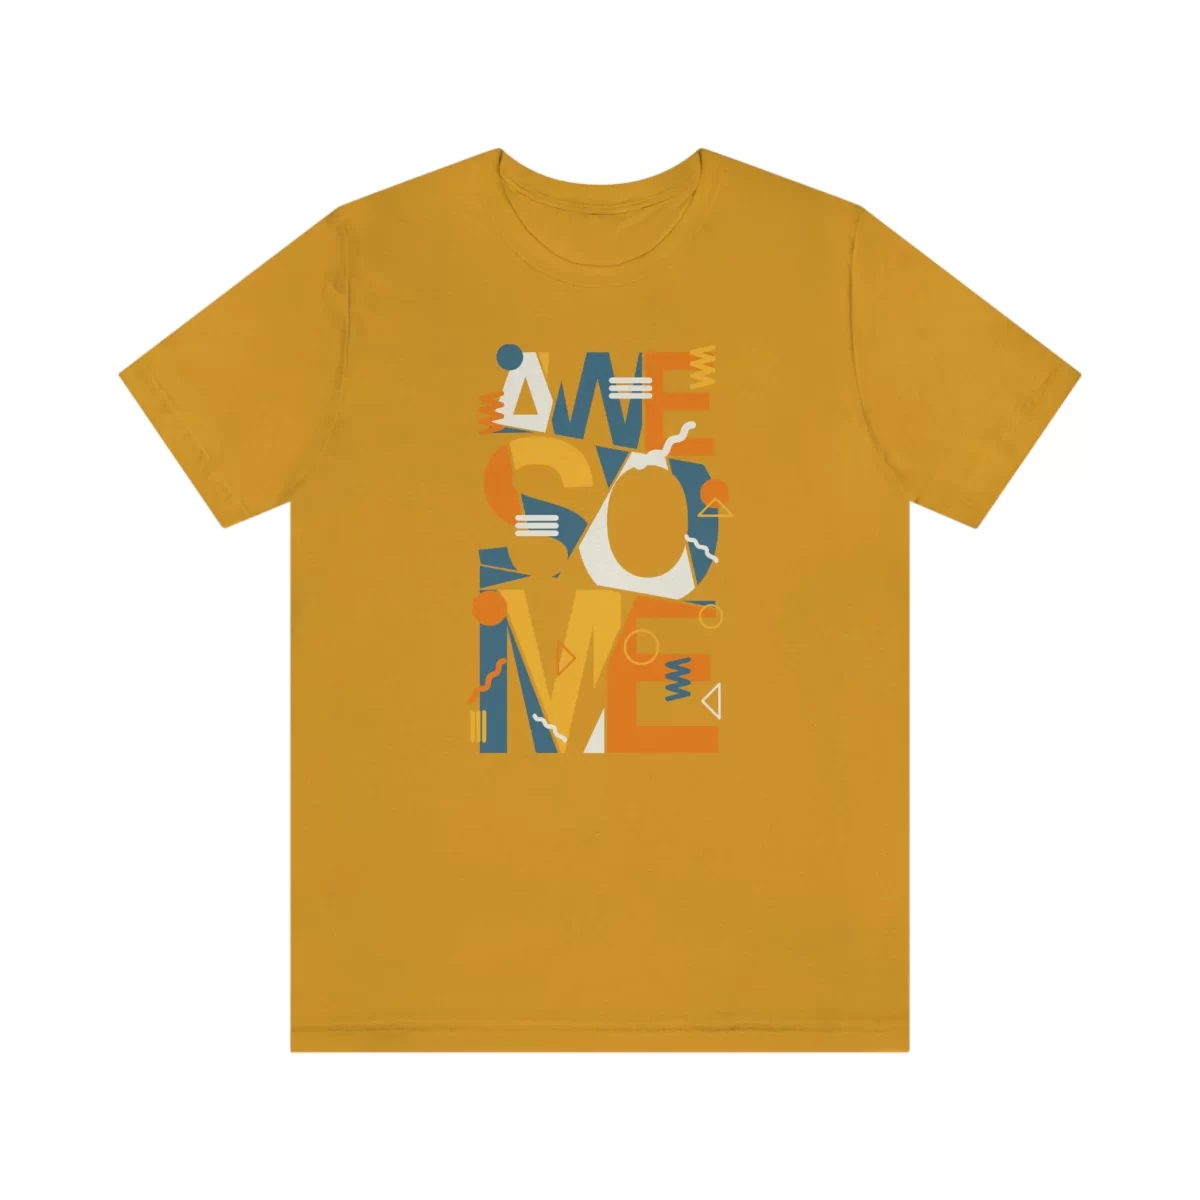 Unisex T Shirt Awesome Mustard Front